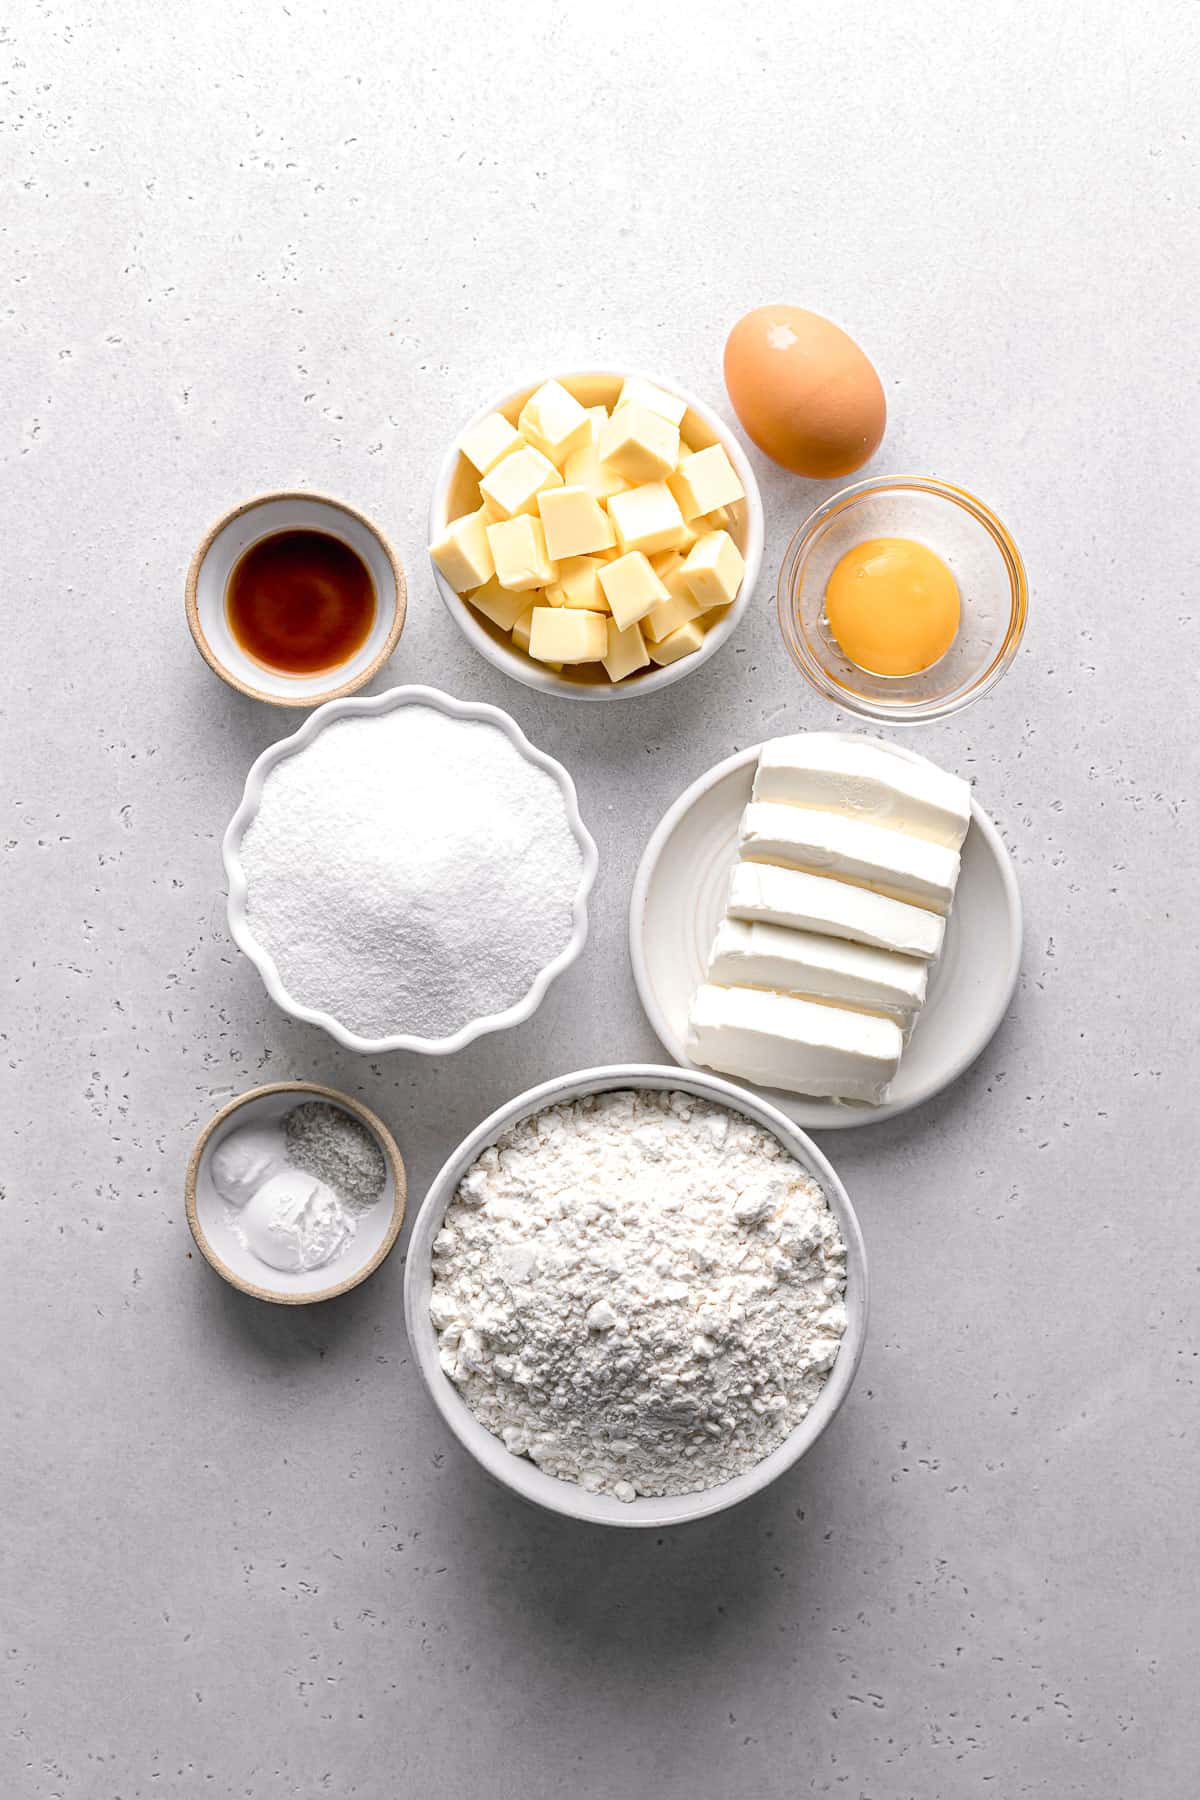 ingredients for cream cheese cookies.